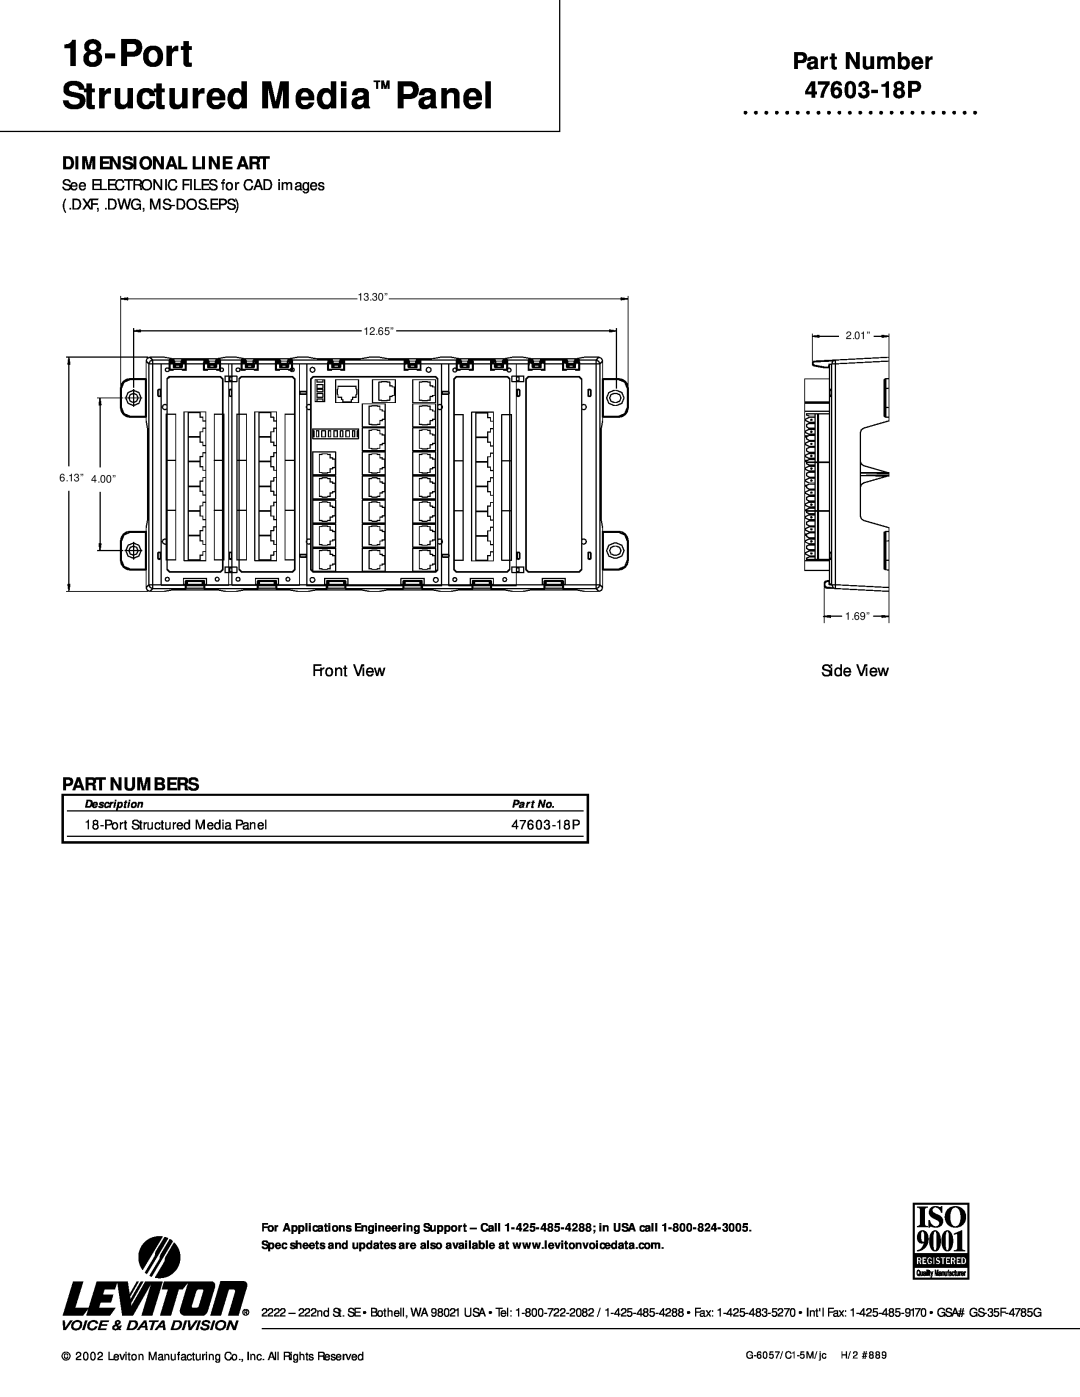 HomeTech Part Number 47603-18P, Dimensional Line Art, Part Numbers, Port Structured Media Panel, 6..13213” 44.0.00” 